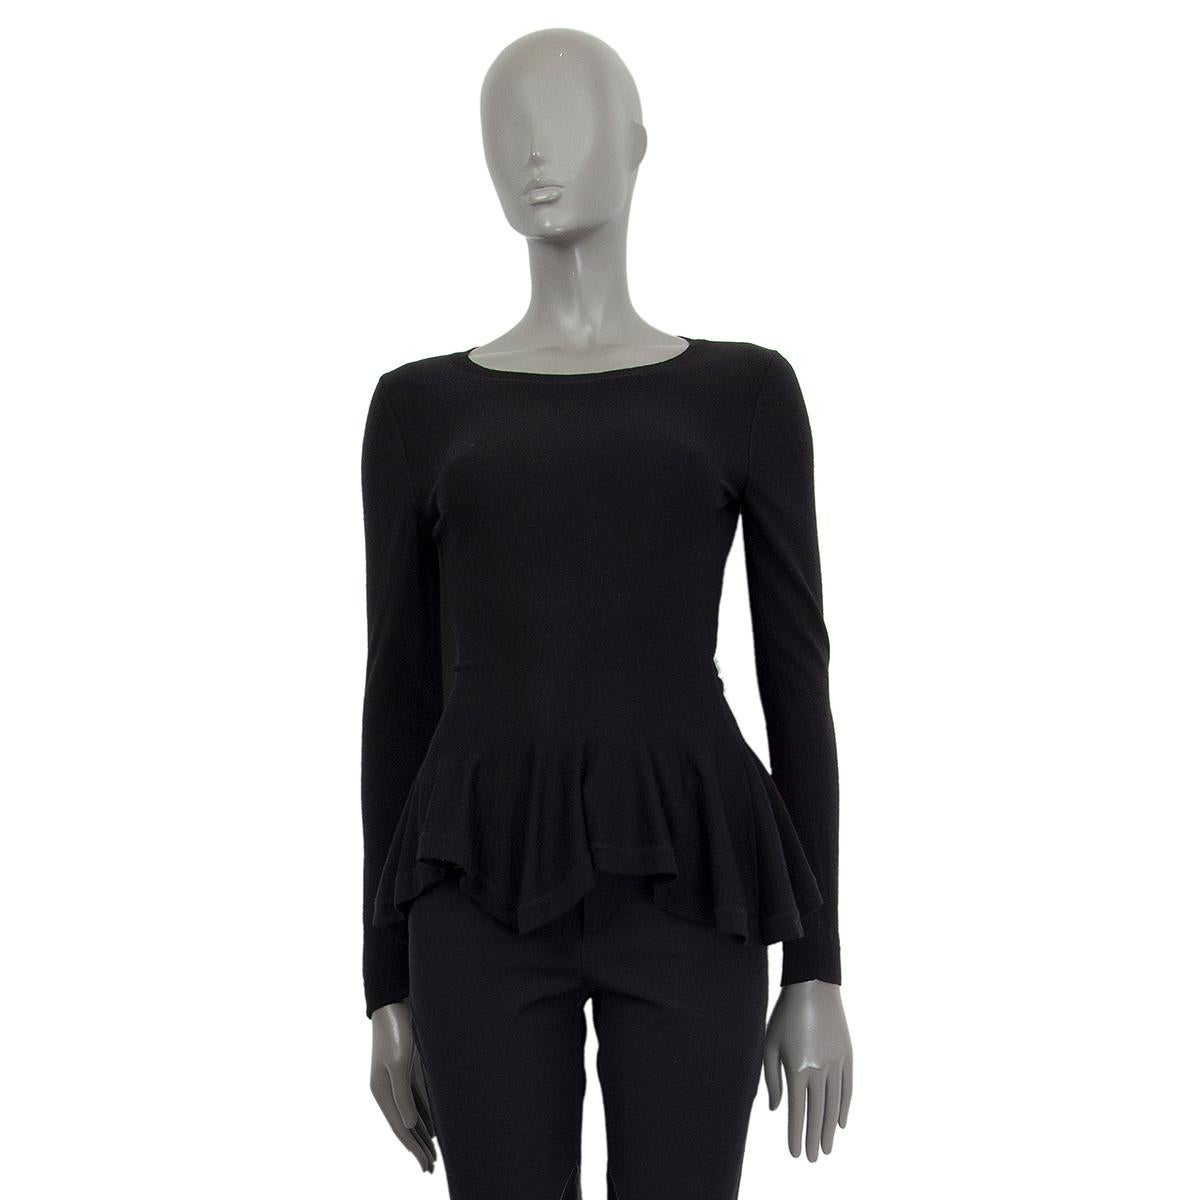 Alexander McQueen long sleeve peplum sweater in fine knit wool (assumed as tag is missing) with round neck. Unlined. Has been worn and is in excellent condition. 

Tag Size Missing Tag
Size S
Shoulder Width 39cm (15.2in)
Bust 76cm (29.6in) to 78cm